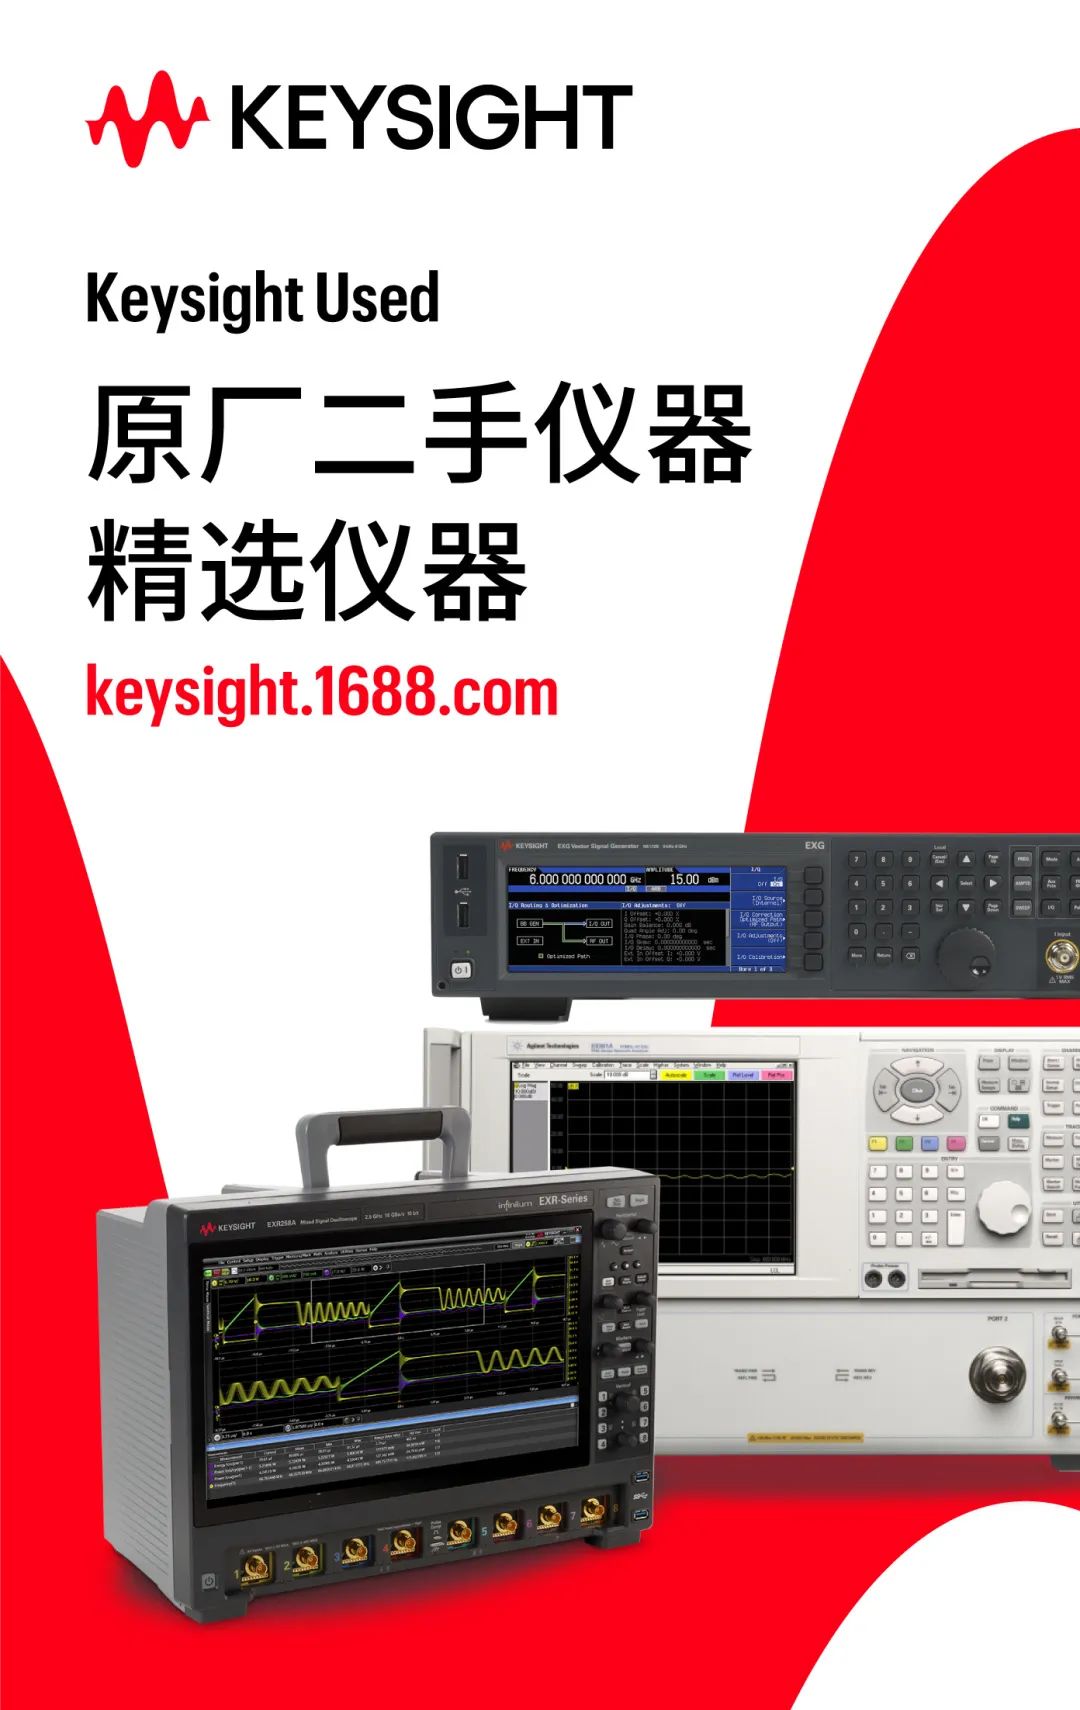 Keysight has chosen what equipment to buy for you